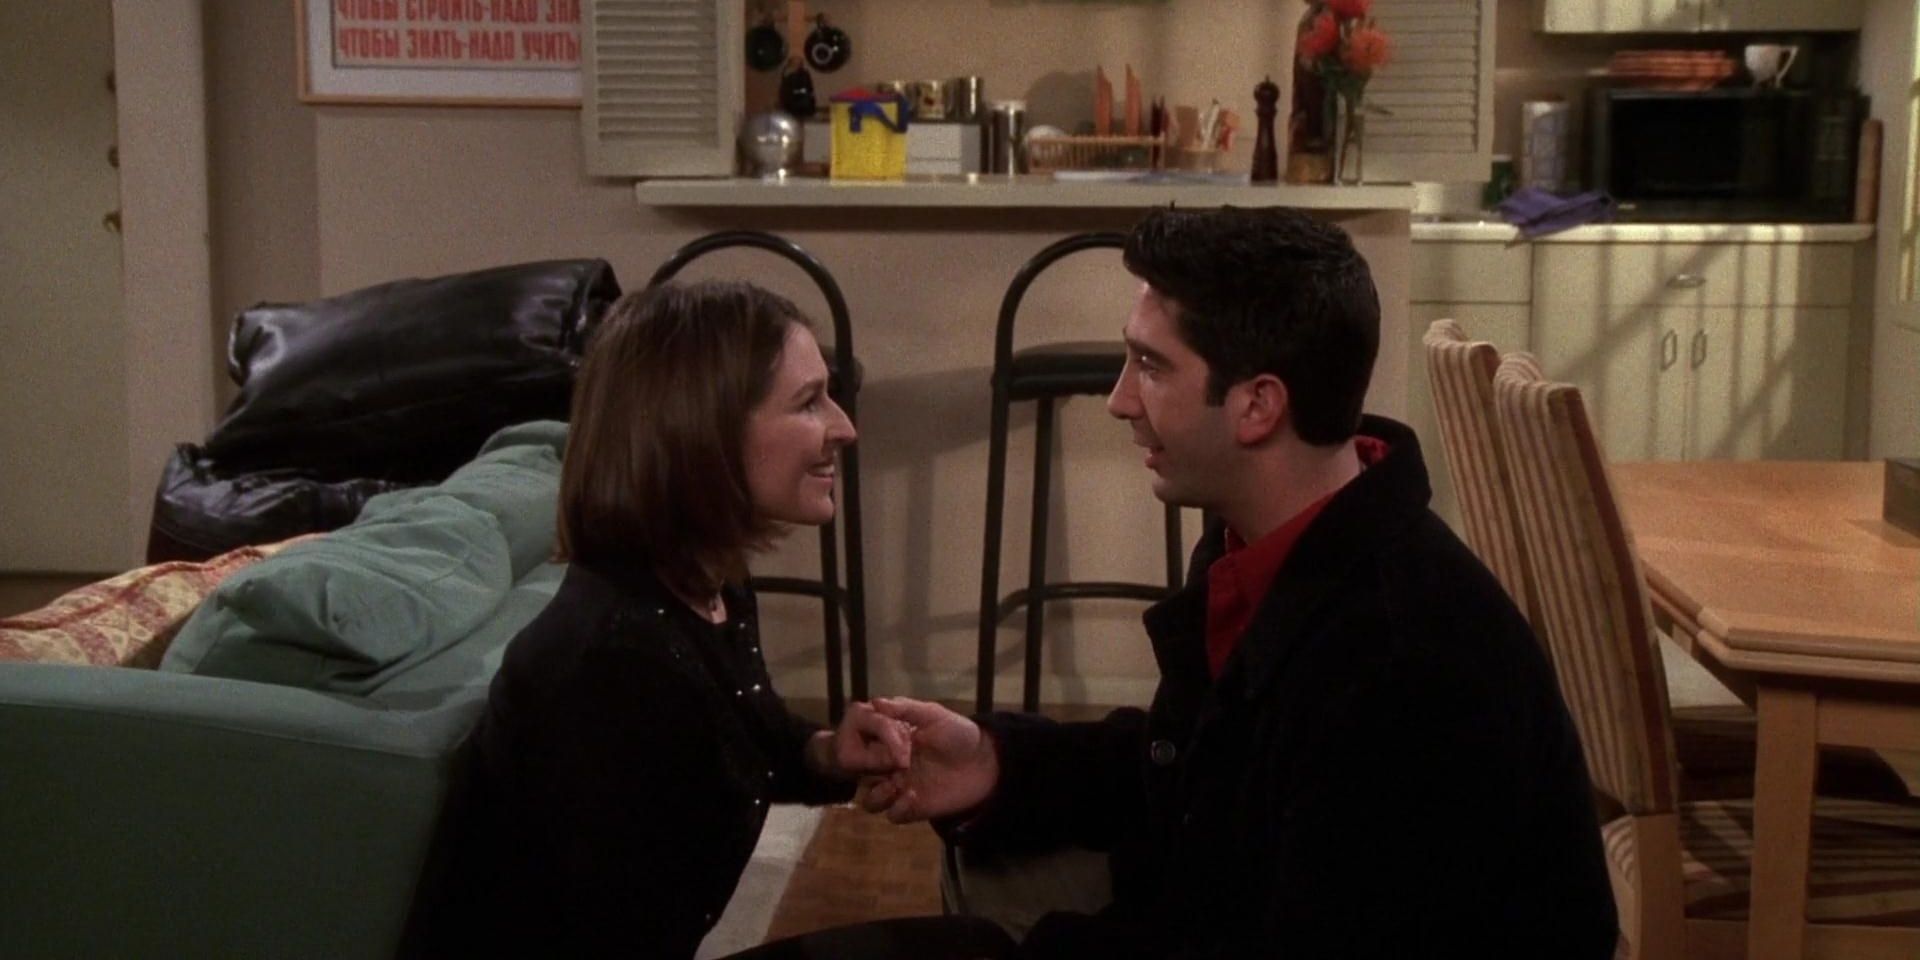 Ross proposing to Emily in Friends.